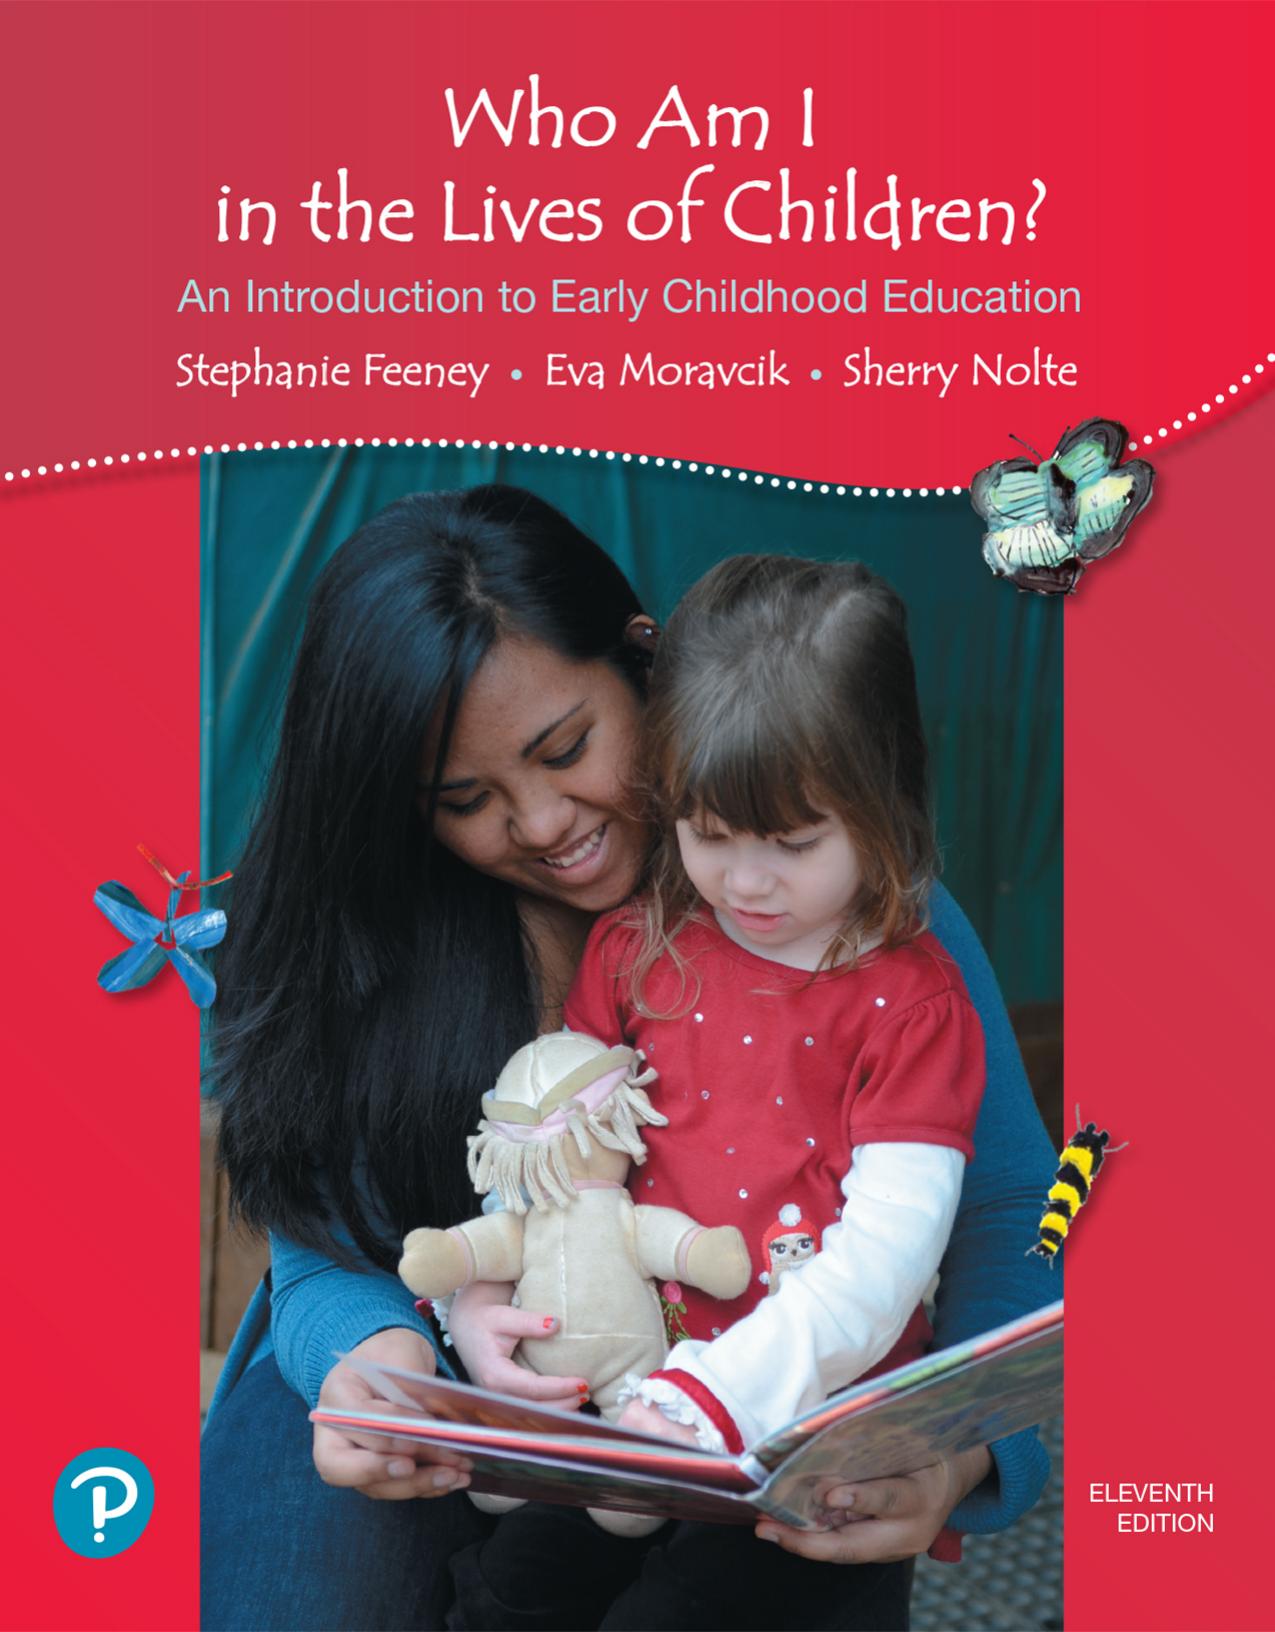 (eBook PDF)Who Am I in the Lives of Children? An Introduction to Early Childhood Education 11th Edition by Stephanie Feeney,Eva Moravcik